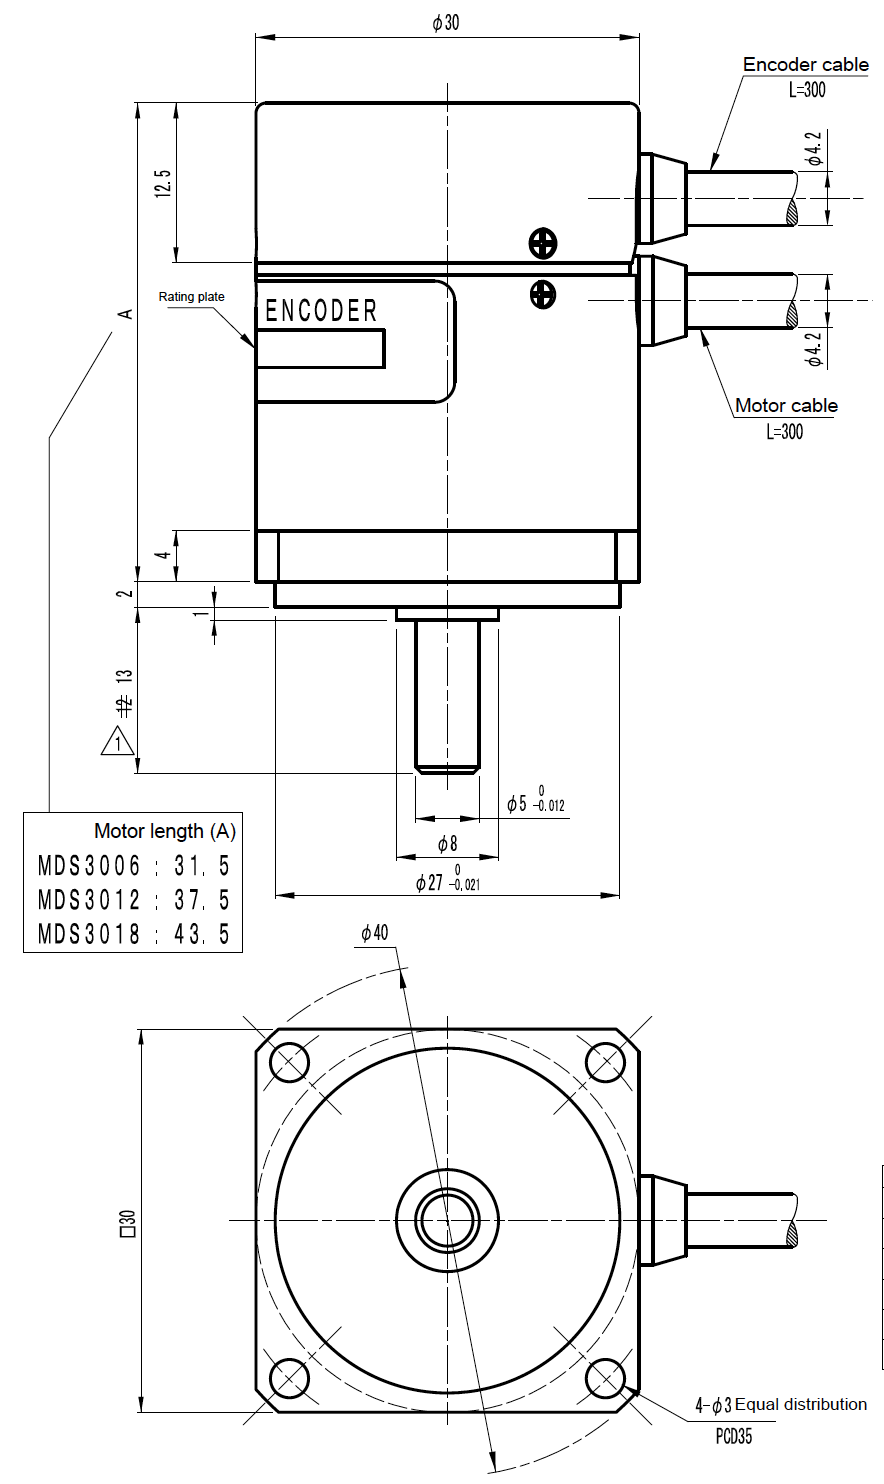 MDS-3006 system drawing